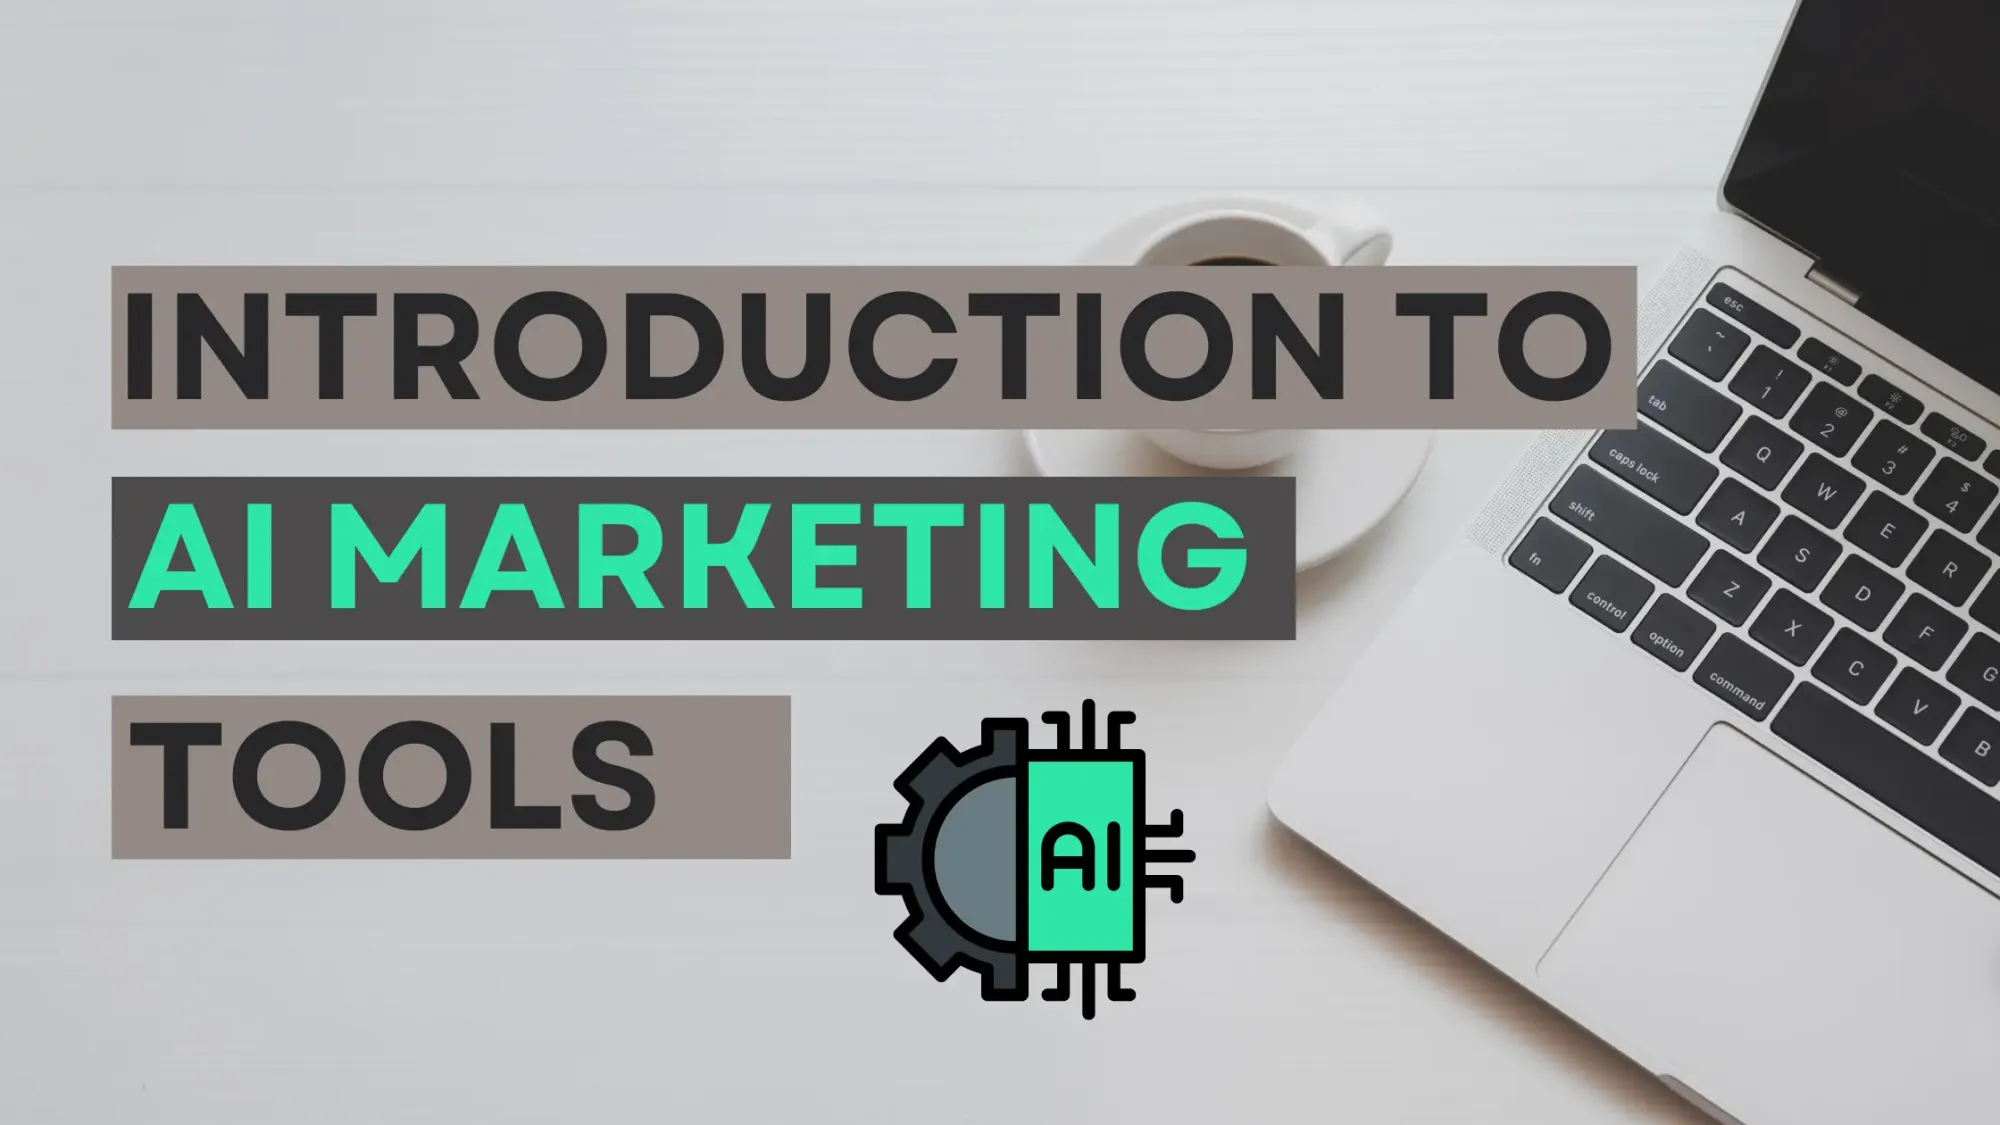 Introduction to AI marketing tools